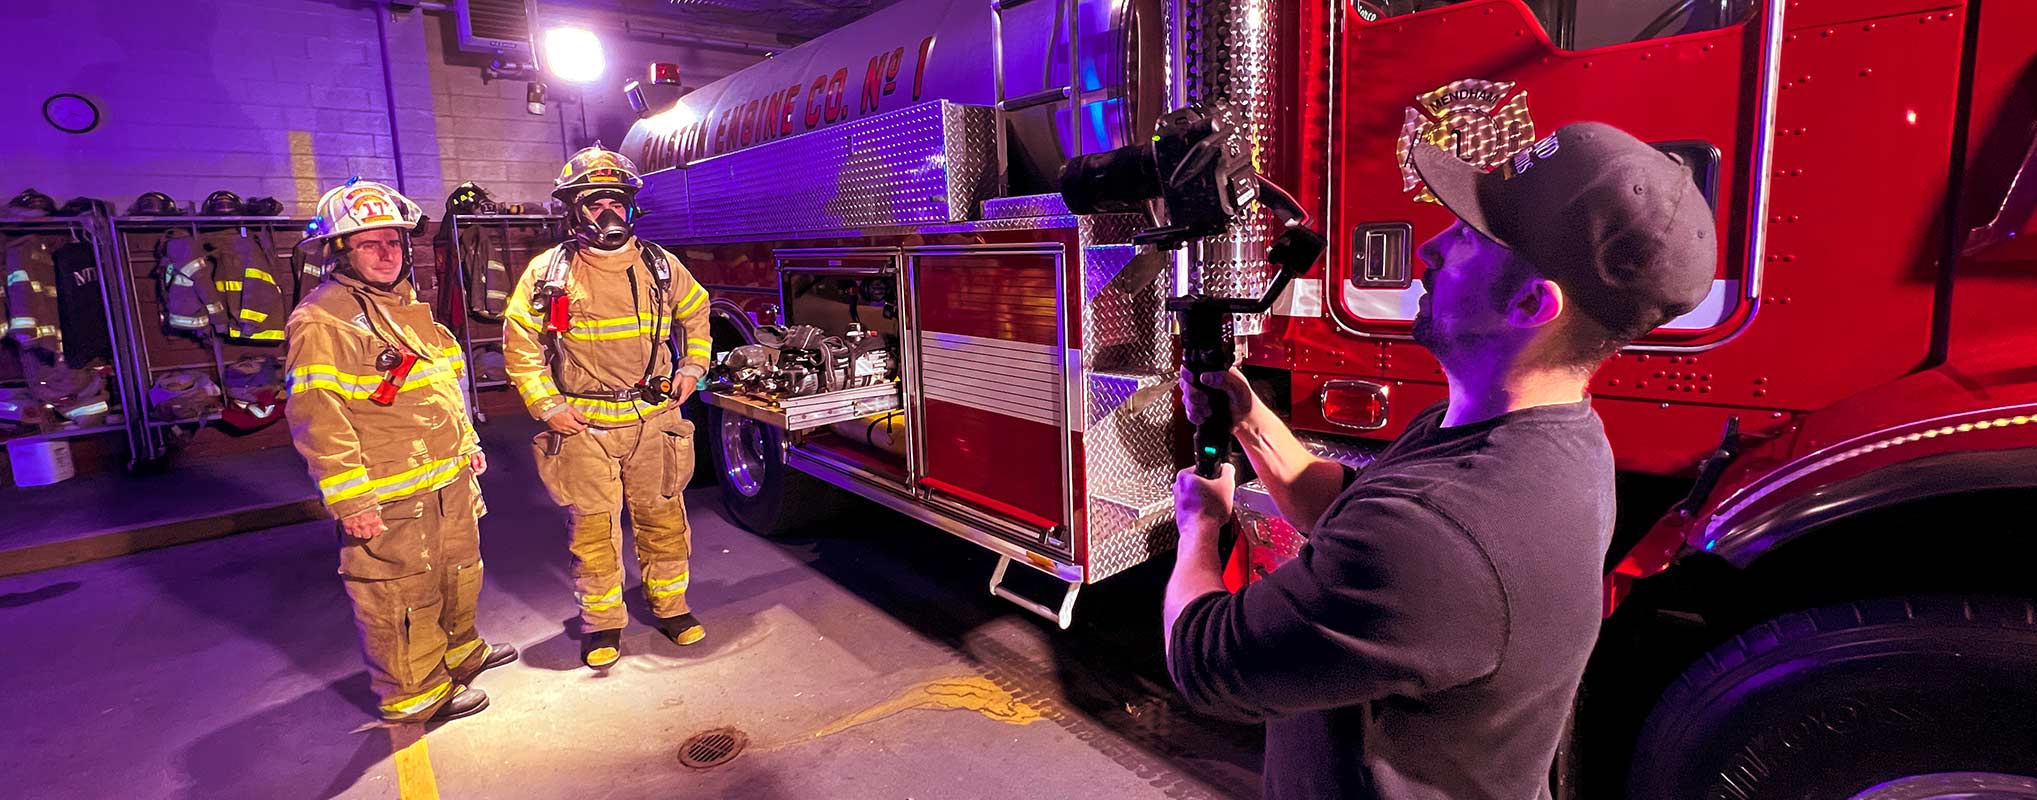 A Filmmaker at Awakened Films uses a gimbal camera while filming a scene with firemen